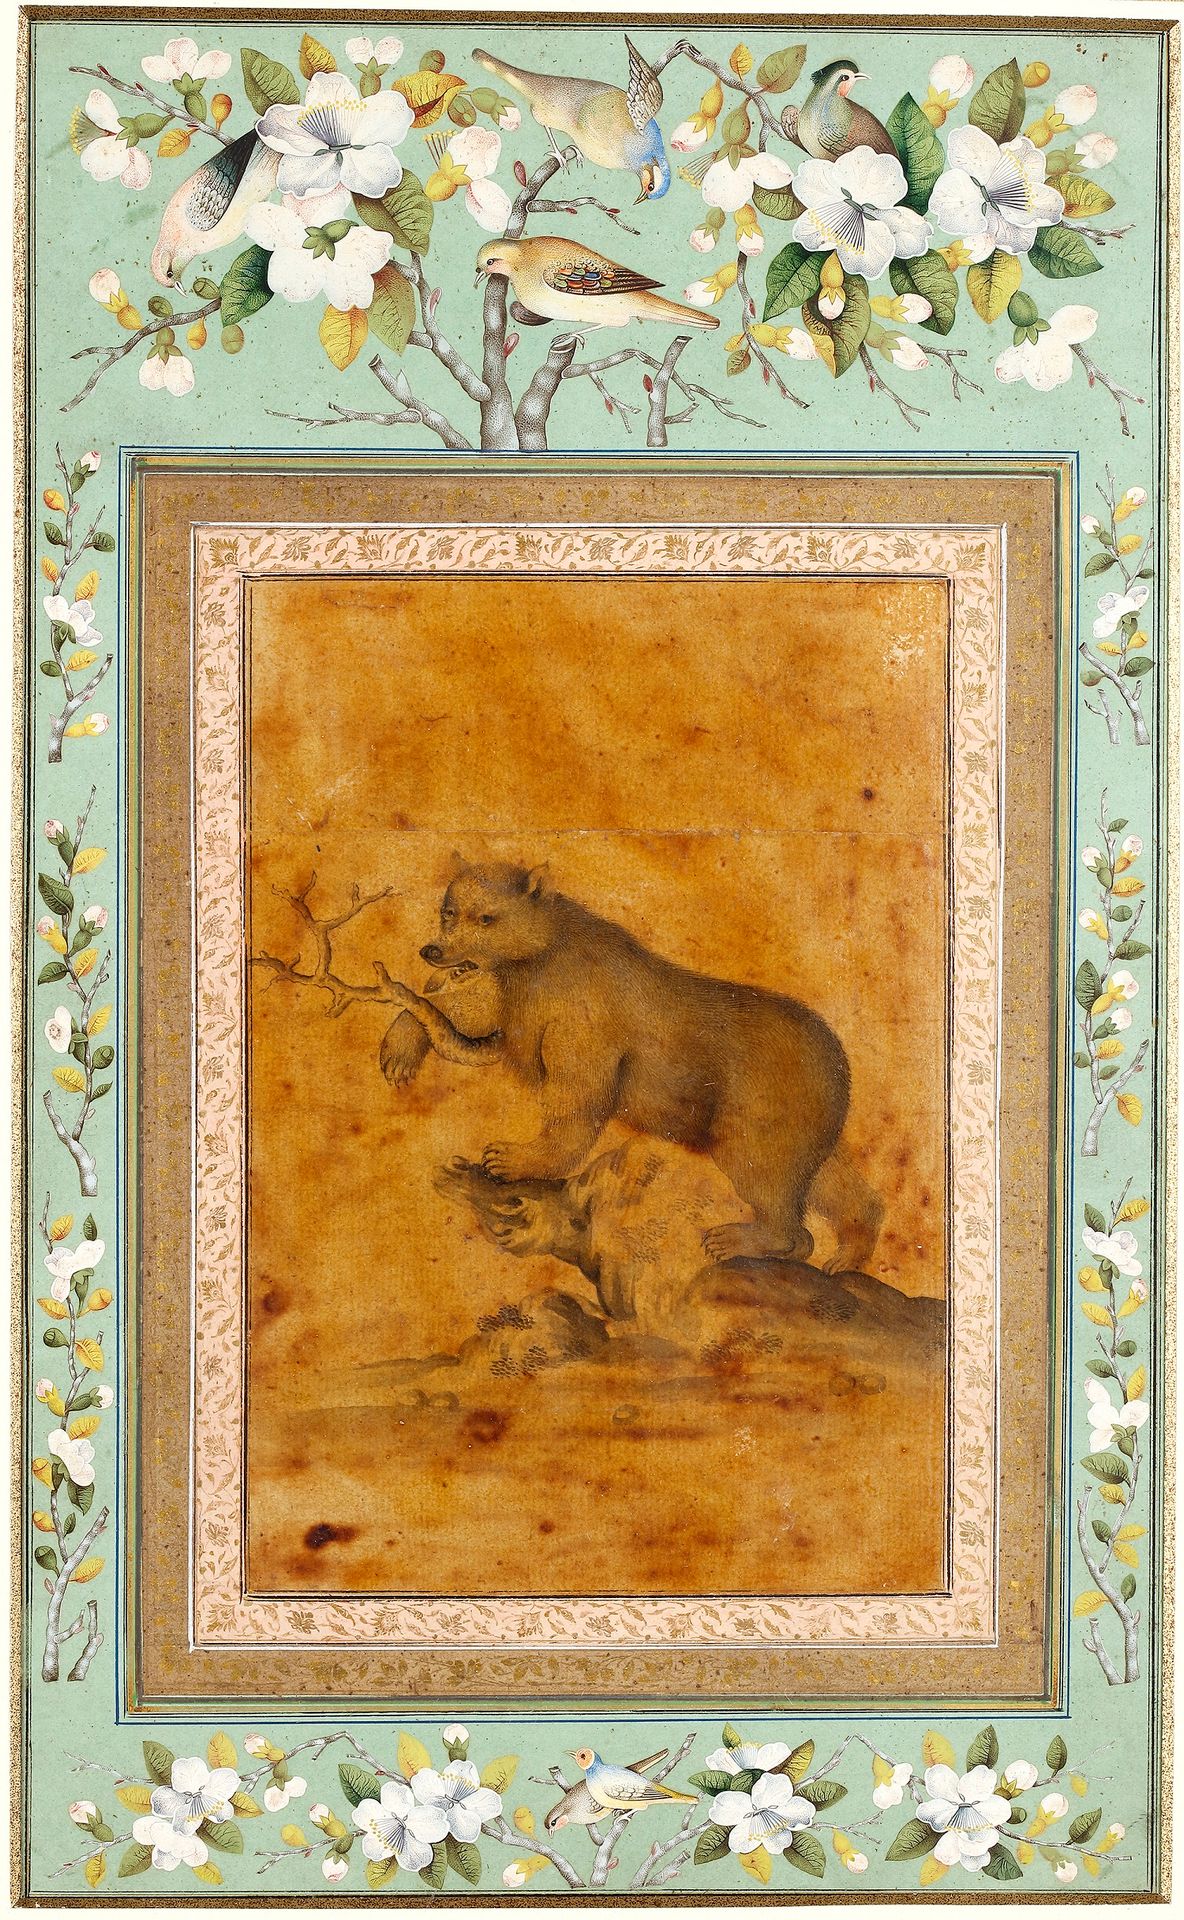 A GRISAILLE PAINTING OF A BEAR, ZAND OR QAJAR IRAN, LATE 18TH CENTURY 钢笔和墨水在漆纸上，&hellip;